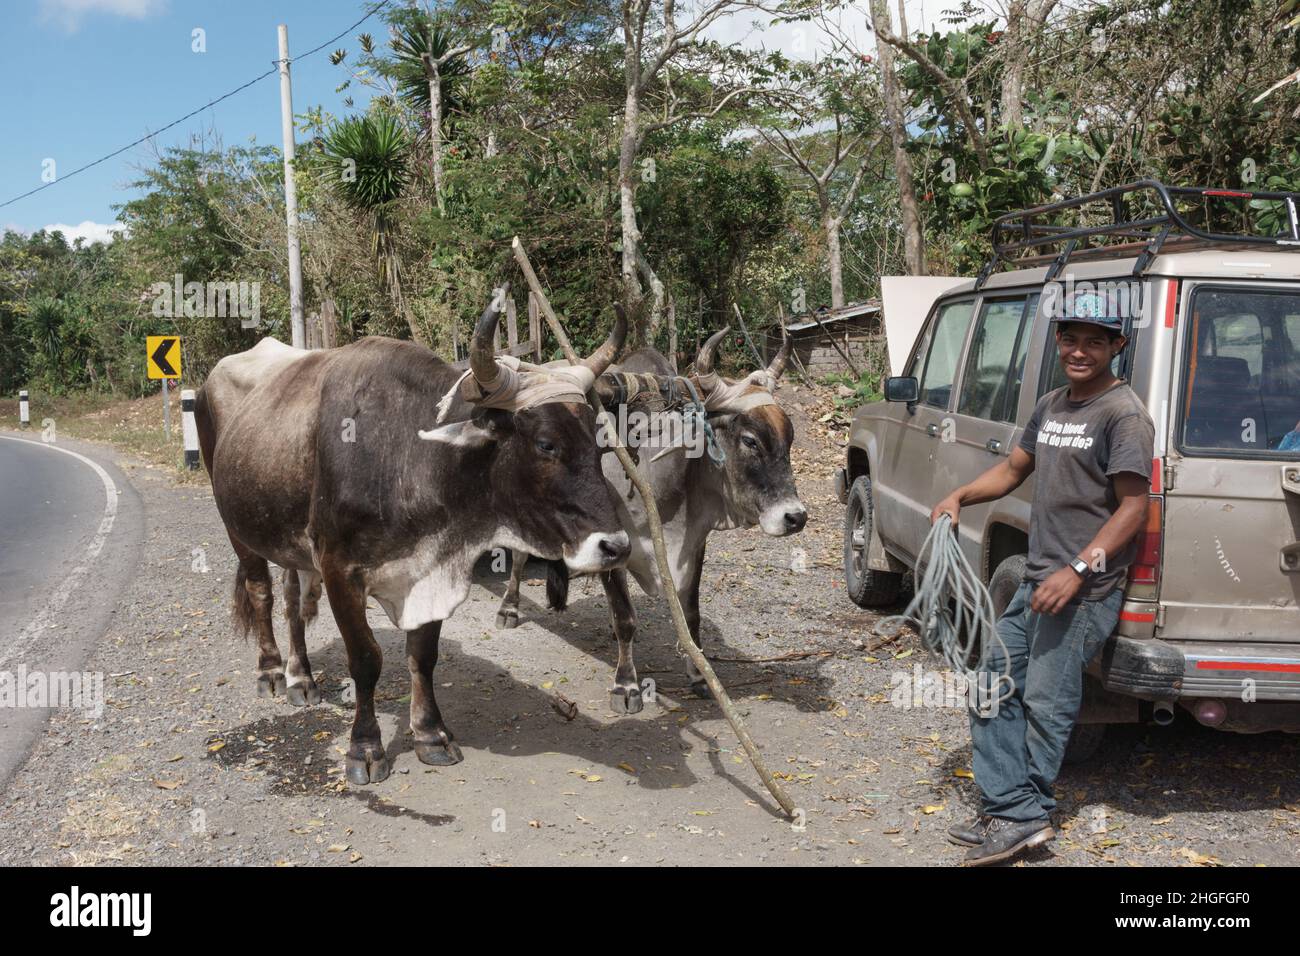 A yoke of oxen with their driver leaning on an SUV in Jinotega Department, Nicaragua. Stock Photo